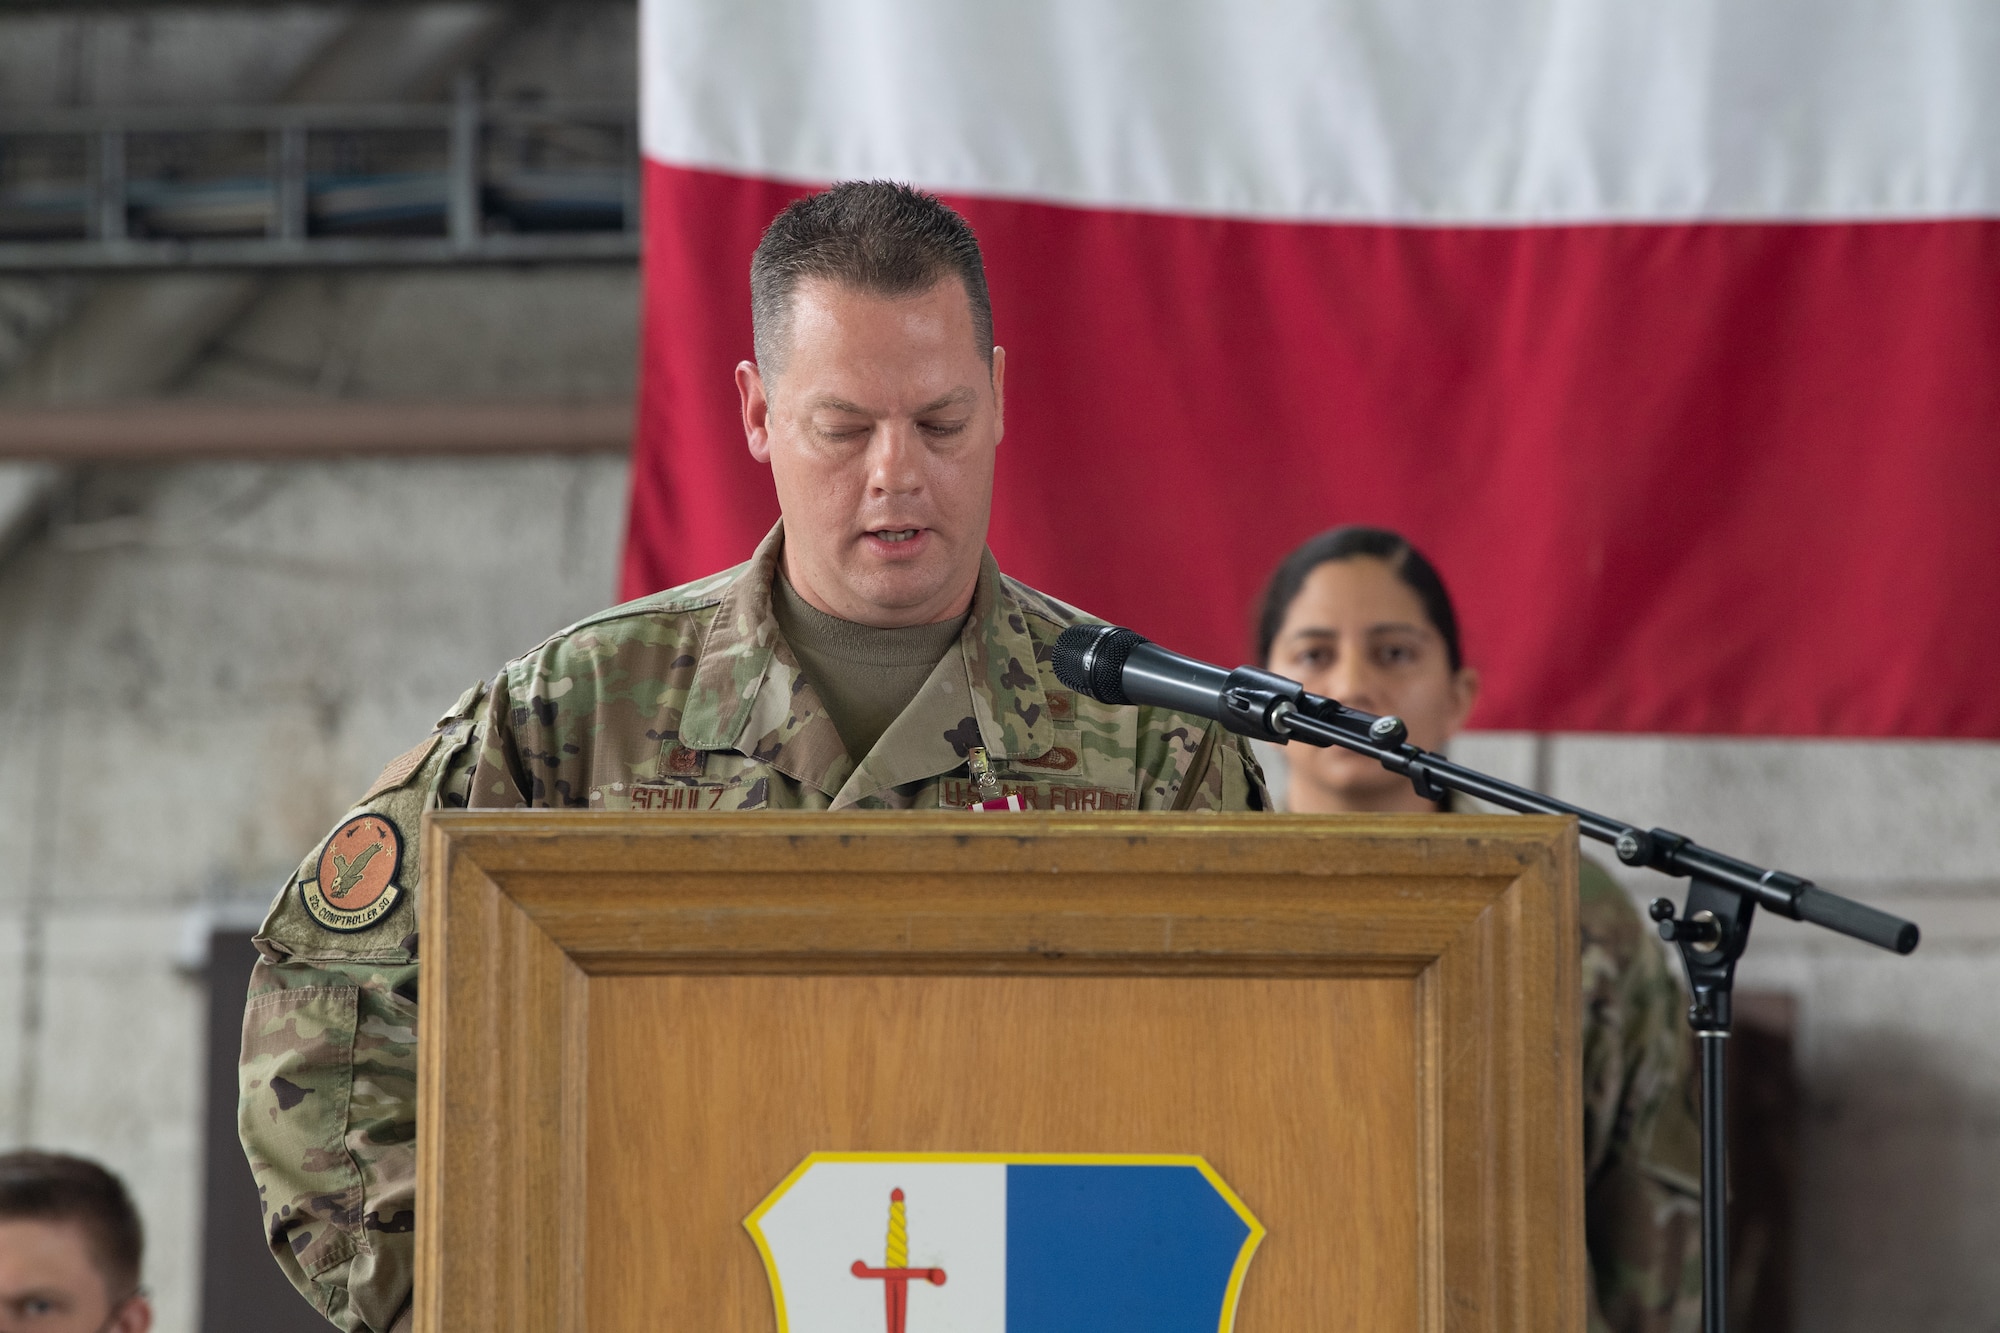 U.S. Air Force Lt. Col. Shawn Schulz, outgoing 52nd Comptroller Squadron commander, addresses the crowd at his change of command ceremony at Spangdahlem Air Base, Germany, June 30, 2021. Schulz has been the commander of the 52nd CPTS since 2018. (U.S. Air Force photo by Senior Airman Ali Stewart)